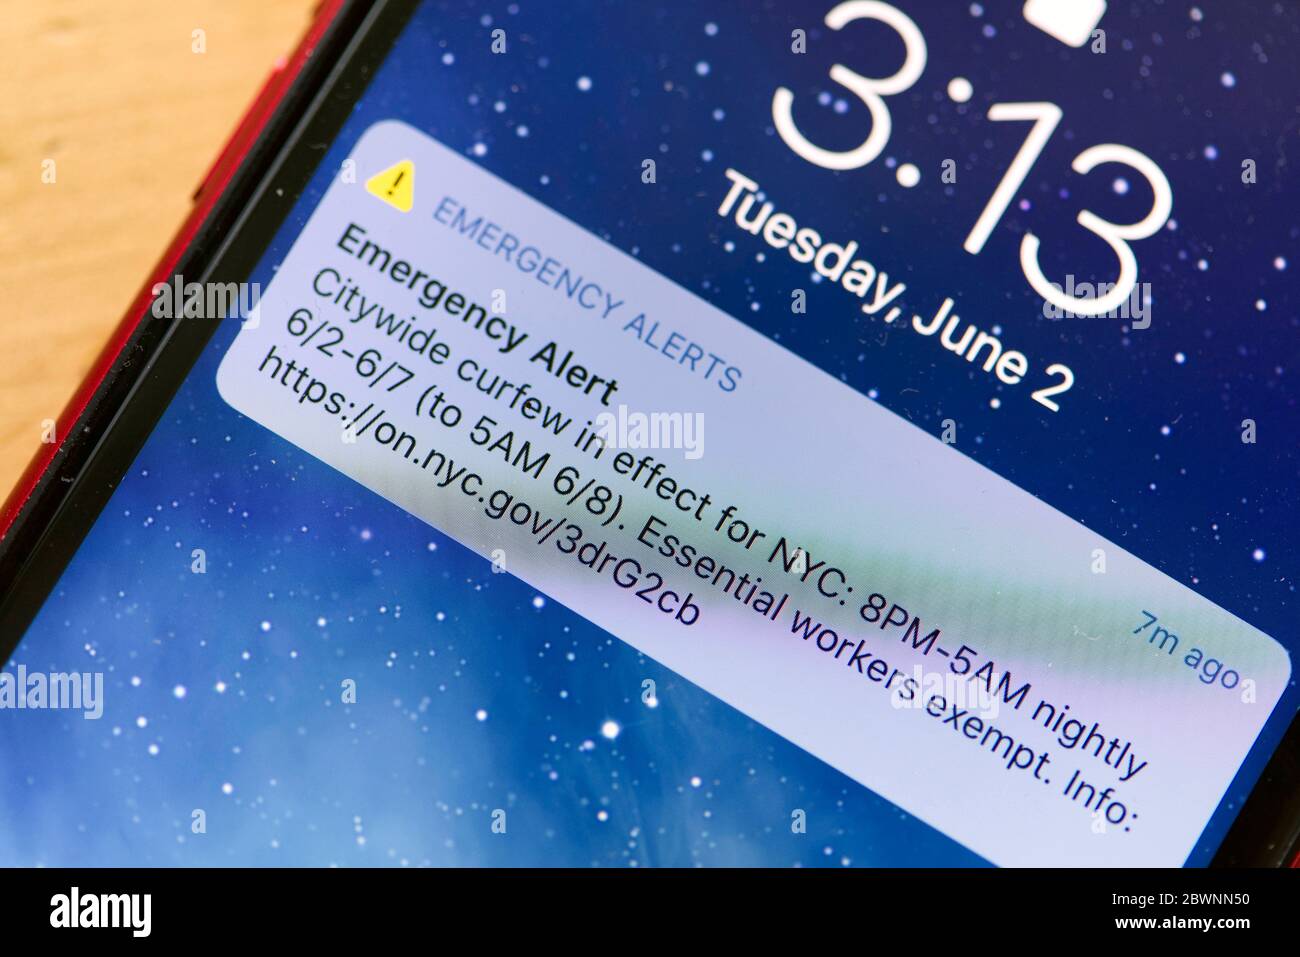 Electronic alert from New York City authorities announcing 8pm - 5am citywide curfew from June 2nd to 7th 2020, displayed on a phone in NYC, NY, USA. Stock Photo